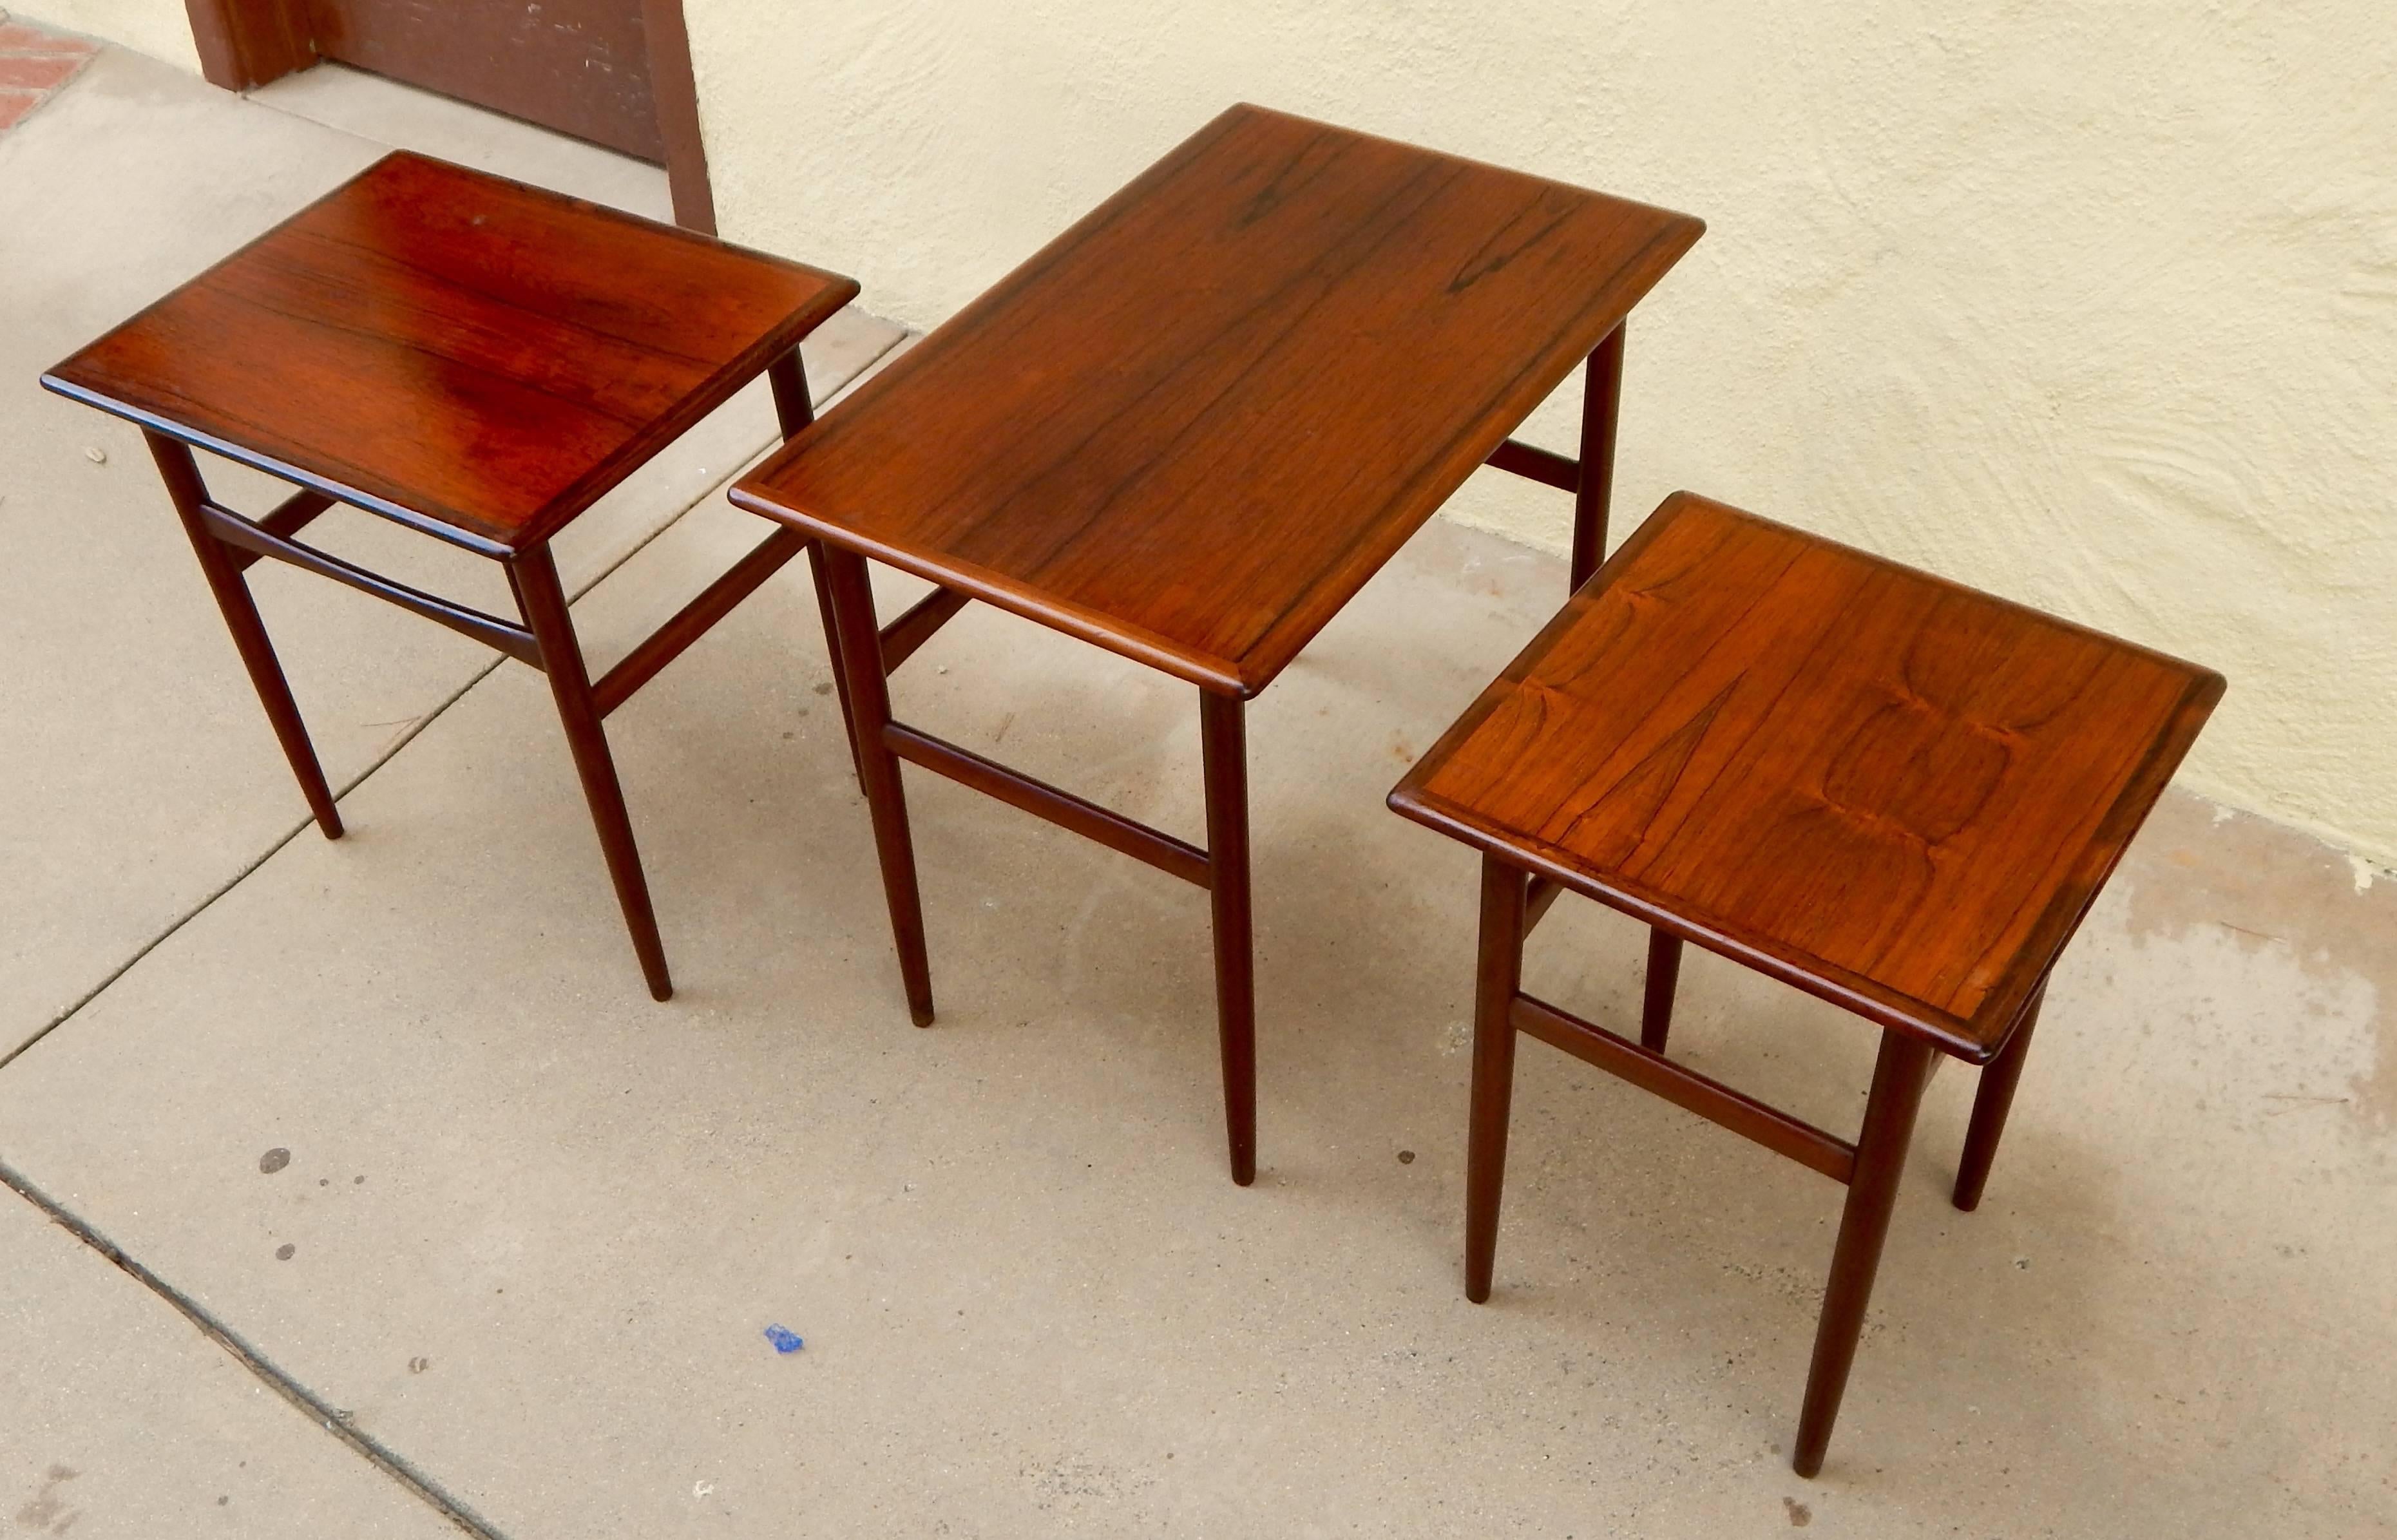 Set of three Swedish Mid-Century Modern rosewood nesting tables, circa 1950. Please see the detail photographs to see the underside hinges which house the smaller table. These are in excellent antique condition in original finish. Please contact us